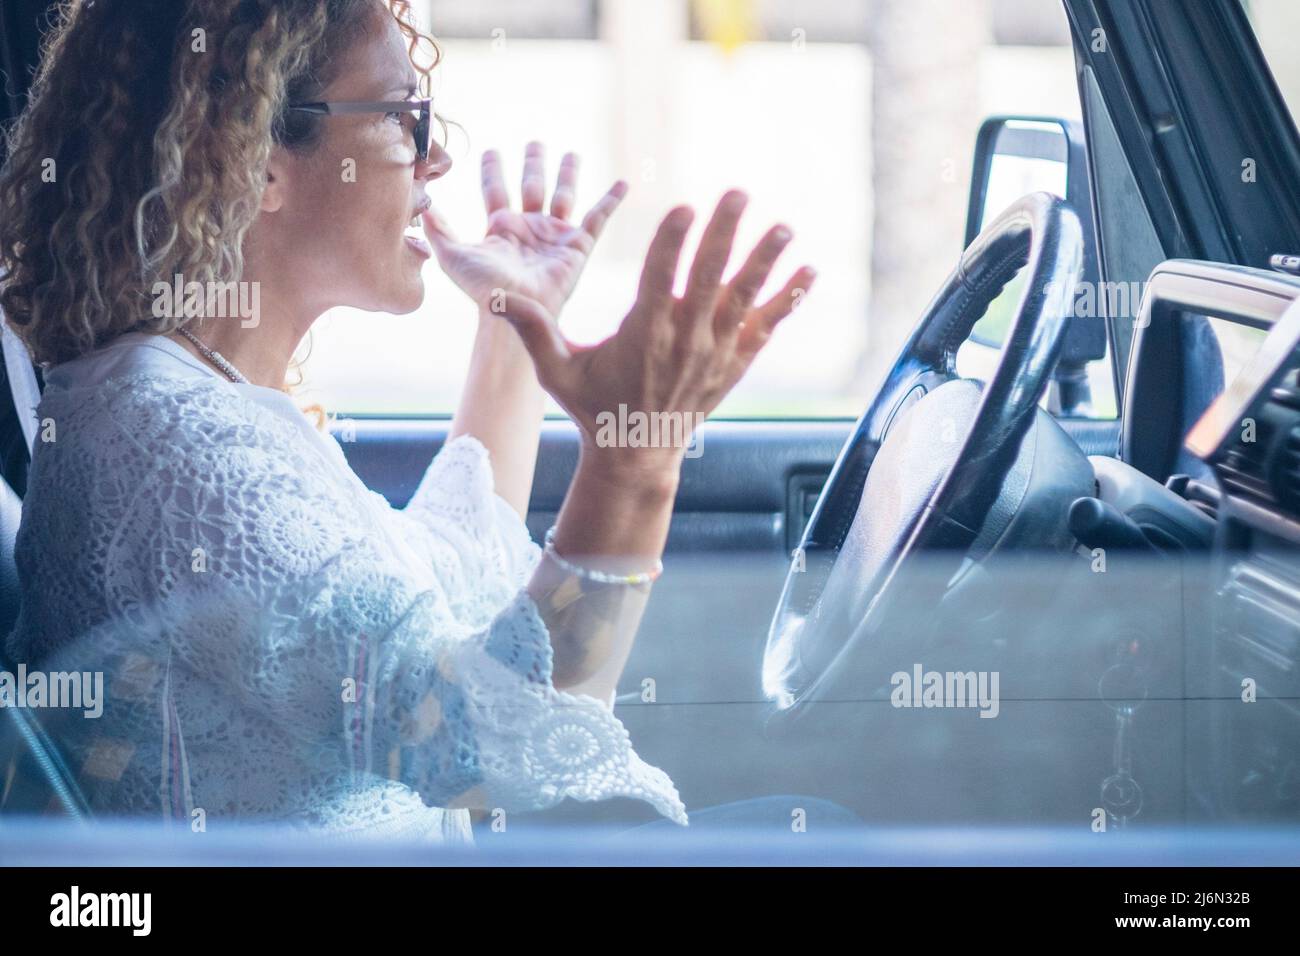 Angry woman driver shout in the traffic - stressed adult people inside car vehicle - hands off of steering wheels safety concept. Stock Photo